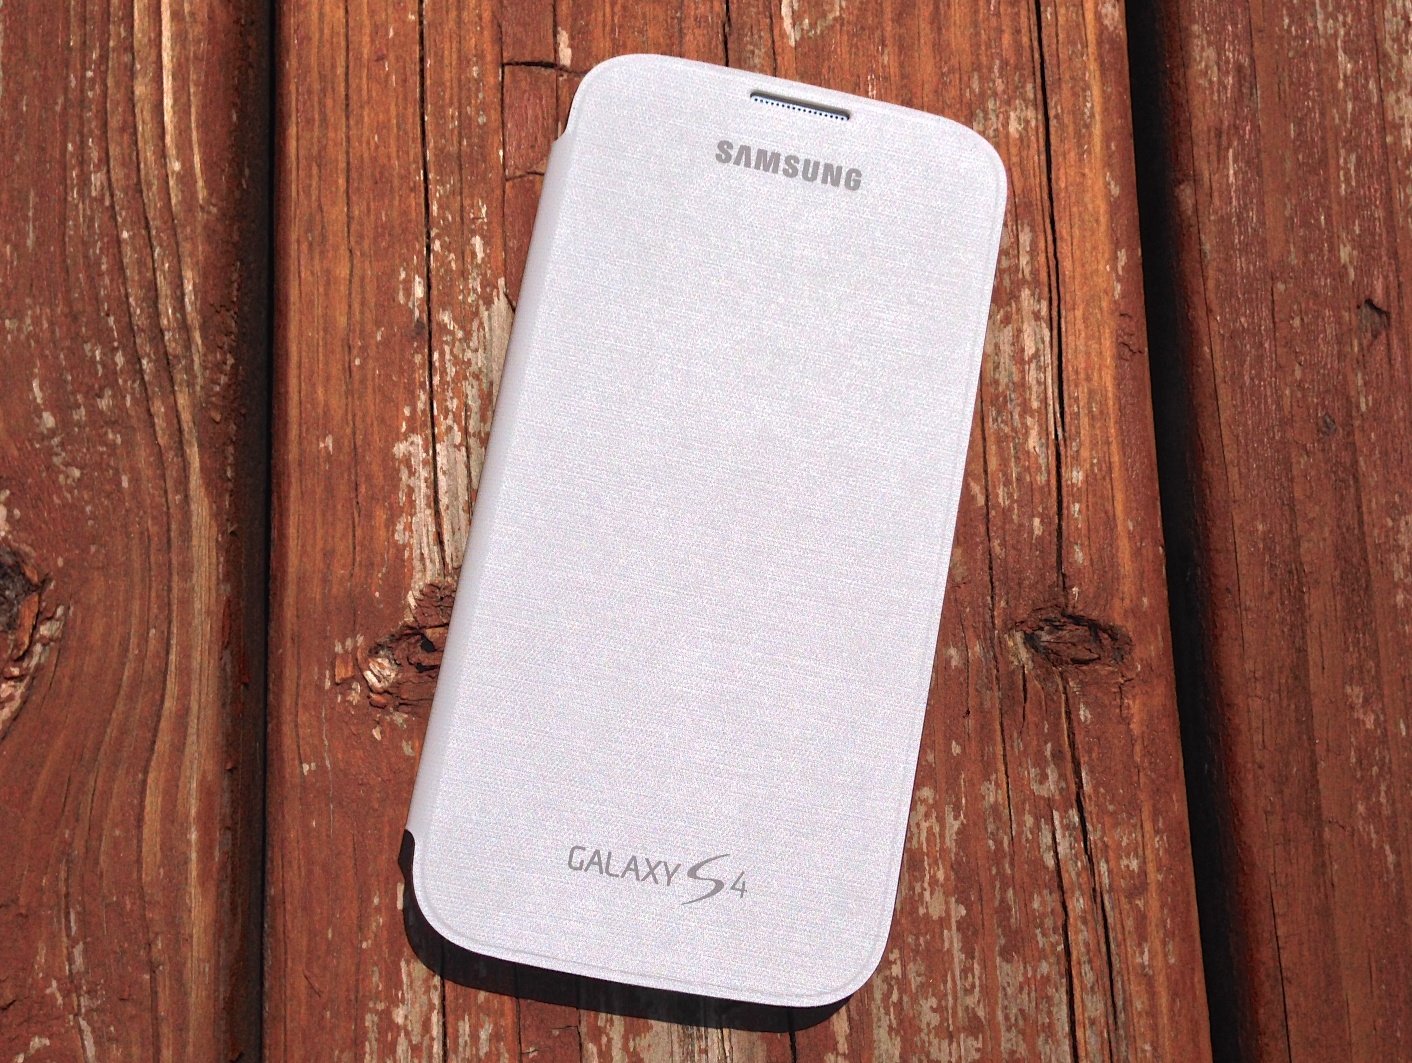 The number of Samsung Galaxy S4 trade-ins spiked in the second half of 2013.